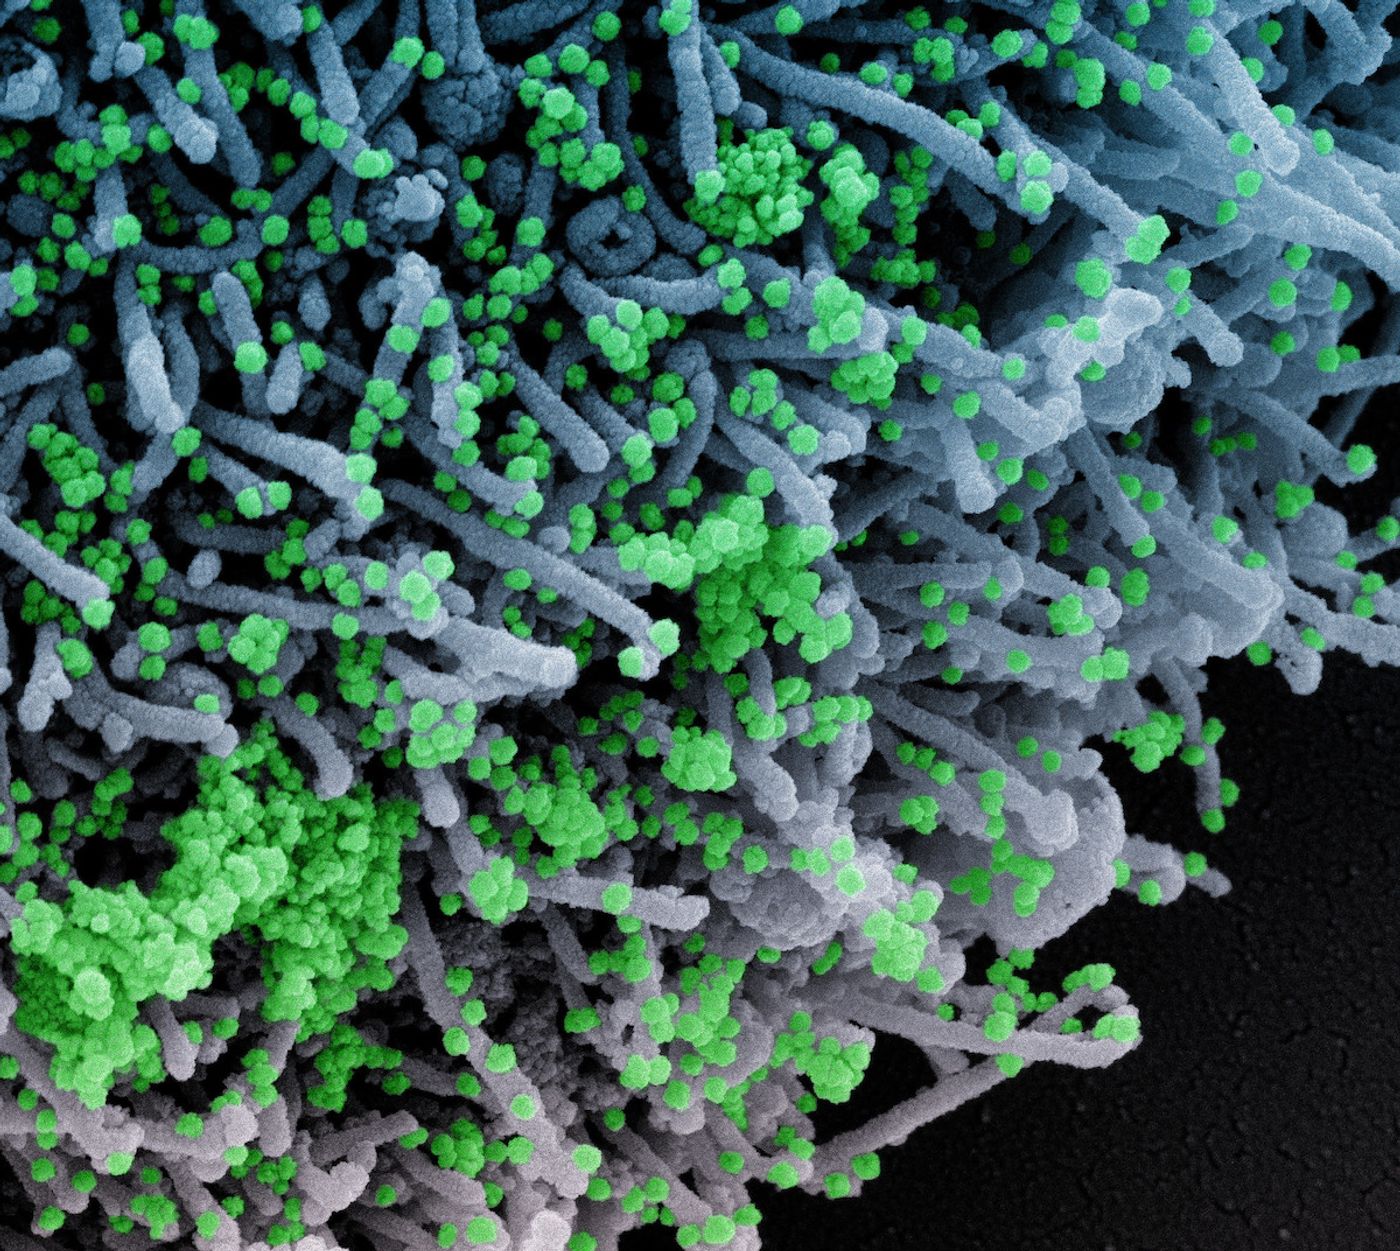 Colorized scanning electron micrograph of a cell (blue) infected with a variant strain of SARS-CoV-2 virus particles (green), isolated from a patient sample. Image captured at the NIAID Integrated Research Facility (IRF) in Fort Detrick, Maryland. Credit: NIAID